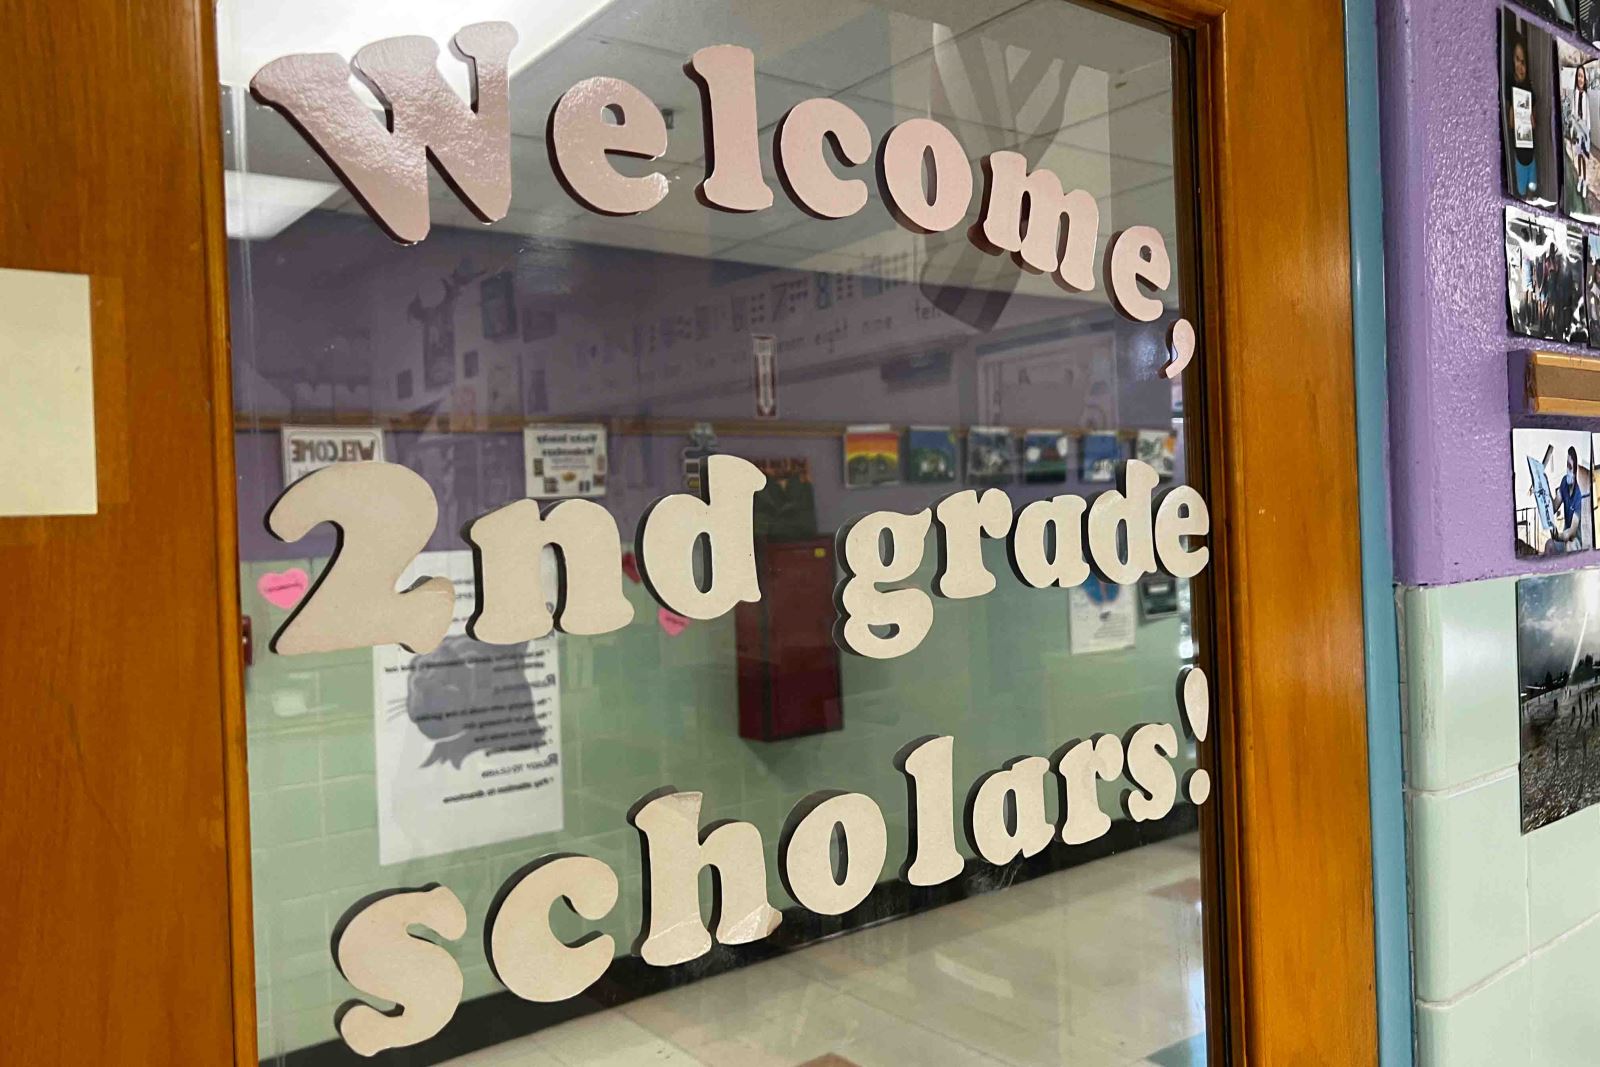 A door sign welcomes 2nd grade scholars to their first day of class